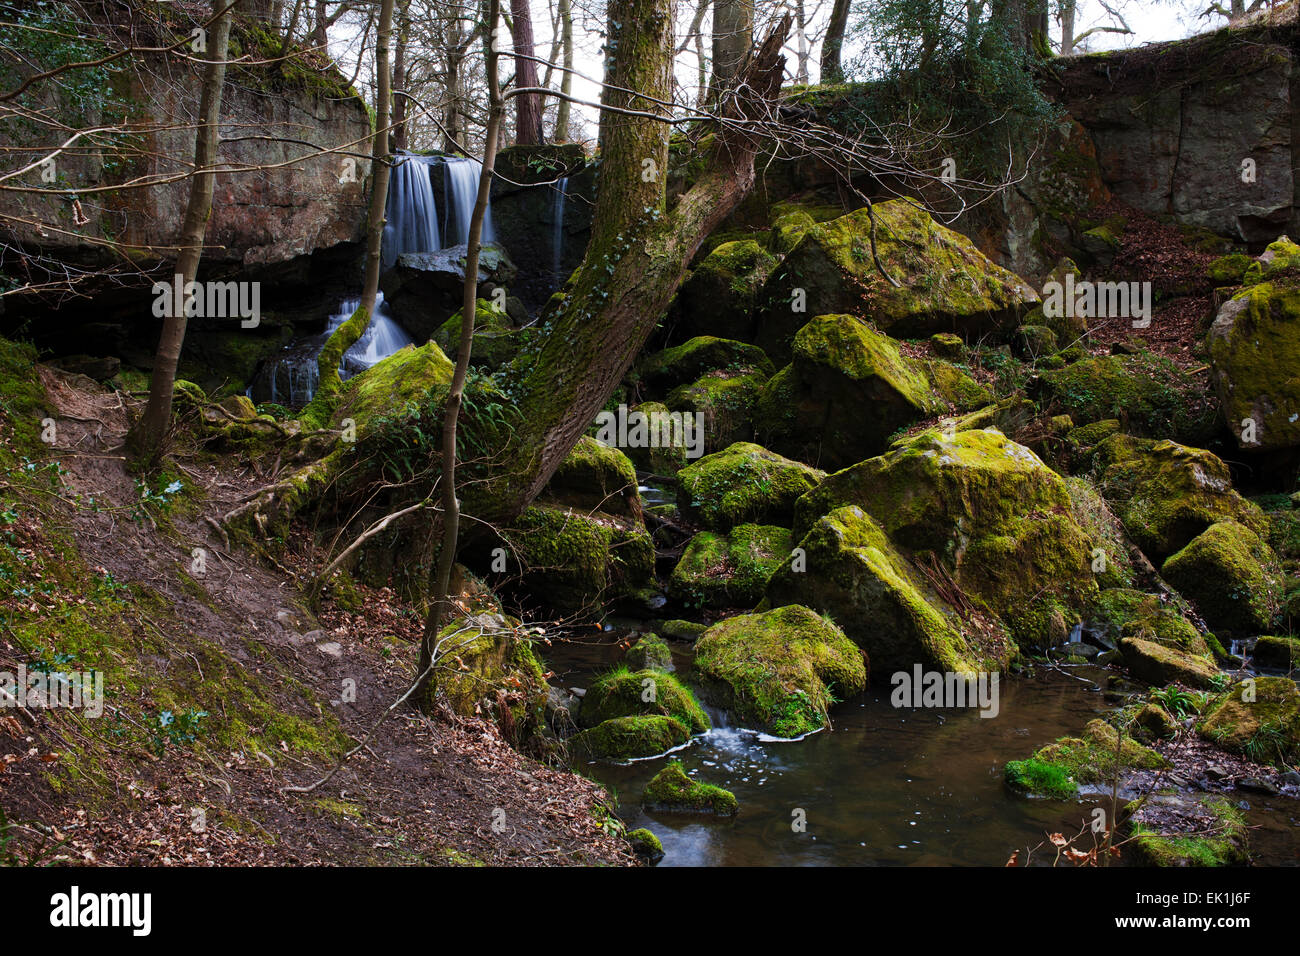 The Pont Burn waterfall in the Pontburn Woods in County Durham. Stock Photo